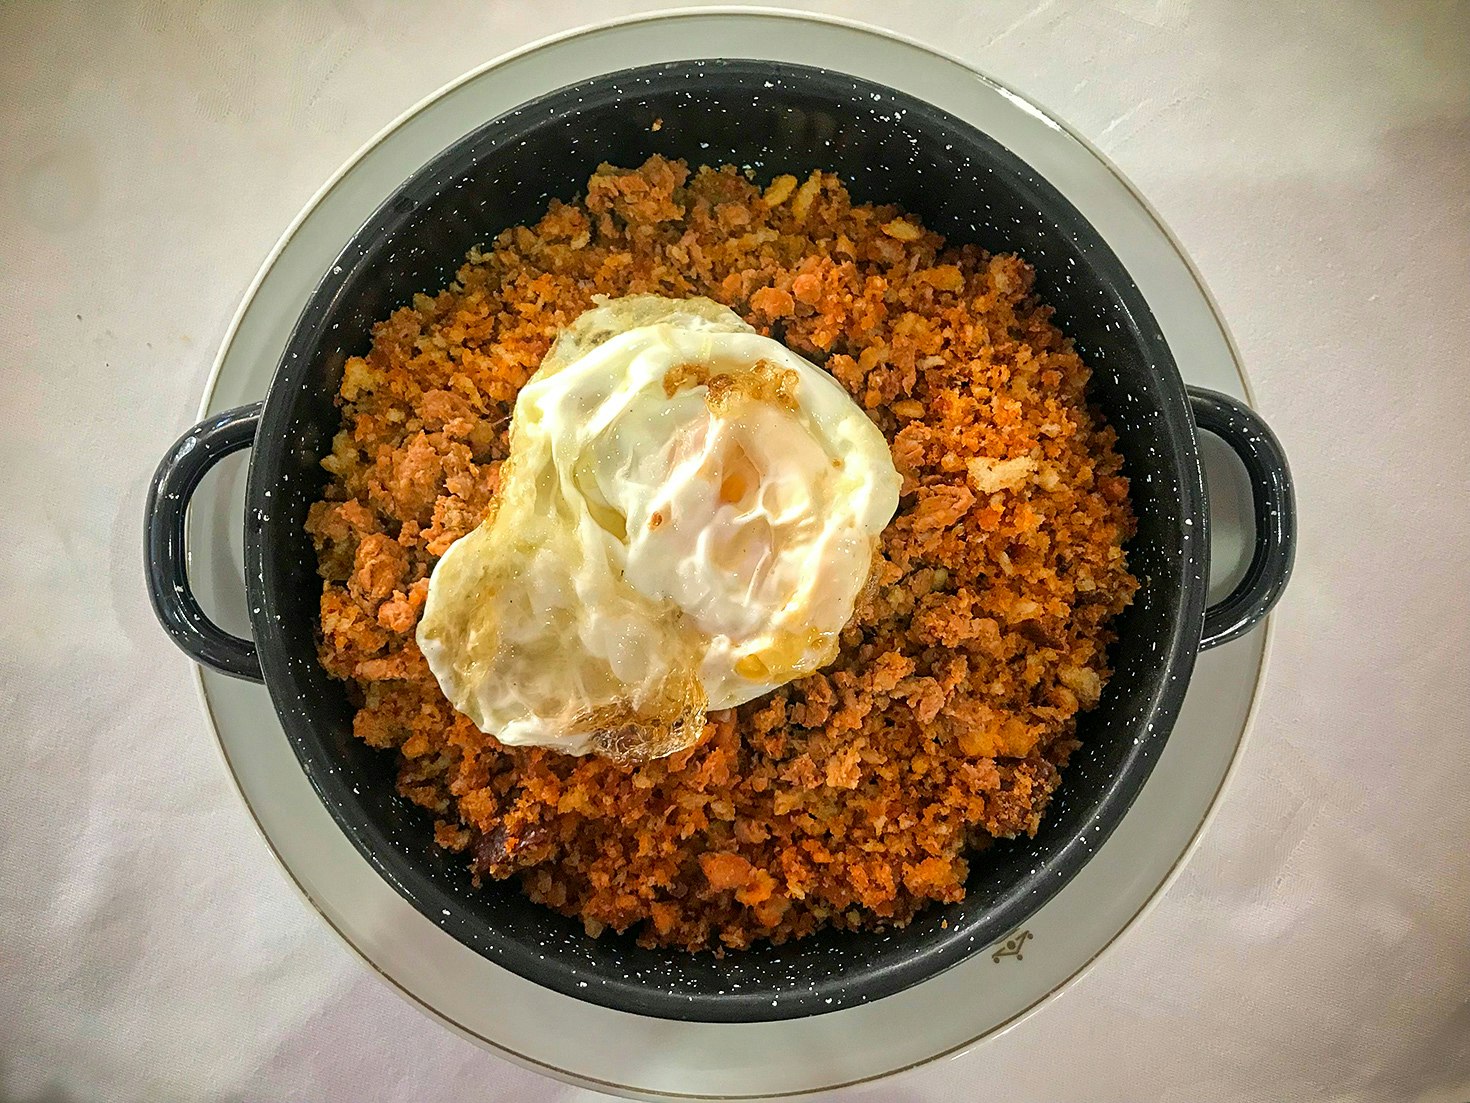 A black serving dish with handles, seen from above, is filled with a fine, lightly spiced, orange-coloured mixture and topped with a fried egg, a traditional dish known as migas trashumanica in Zamora, Spain